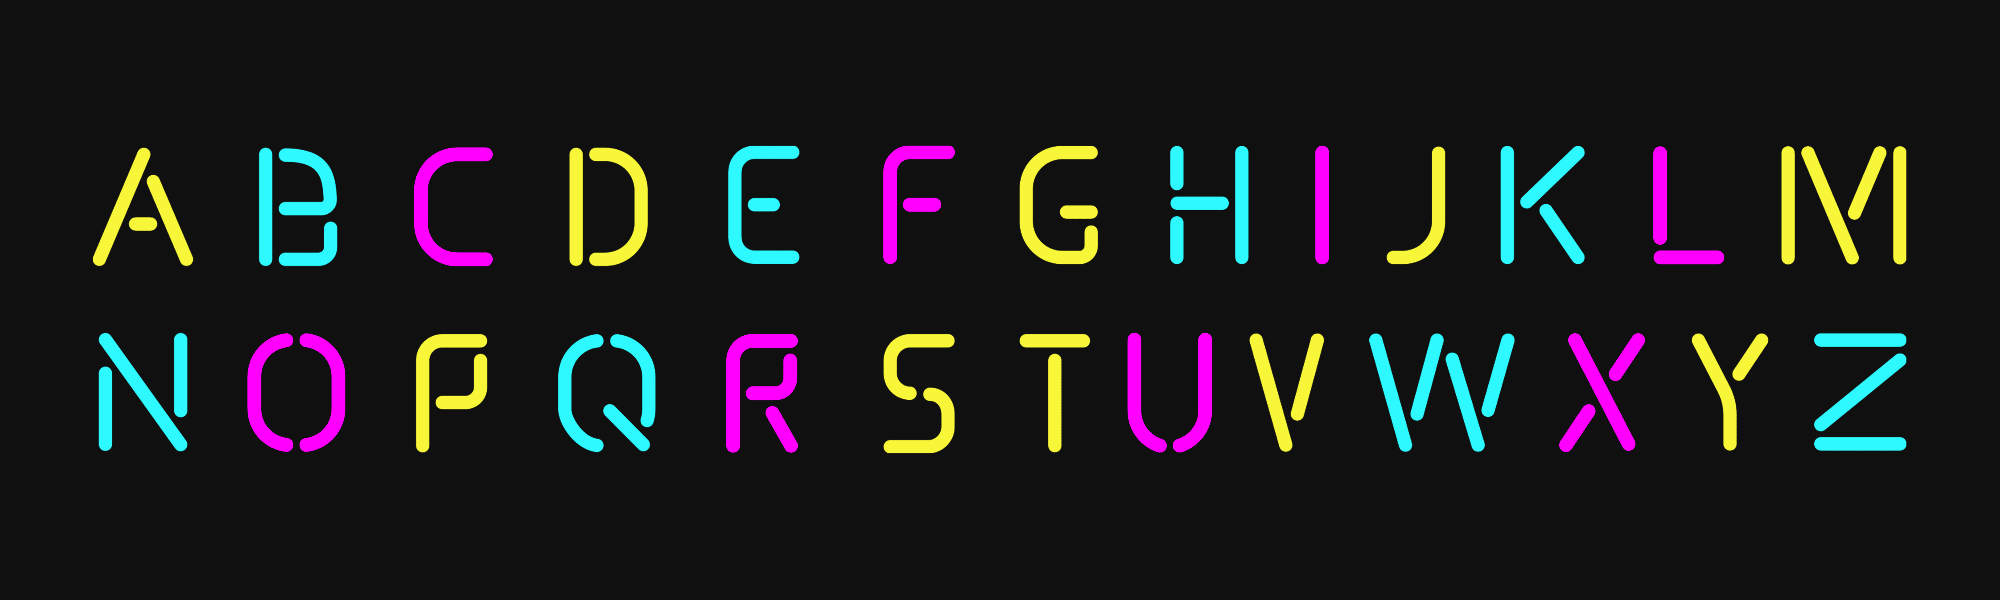 Gif of custom neon typeface blinking in different colors